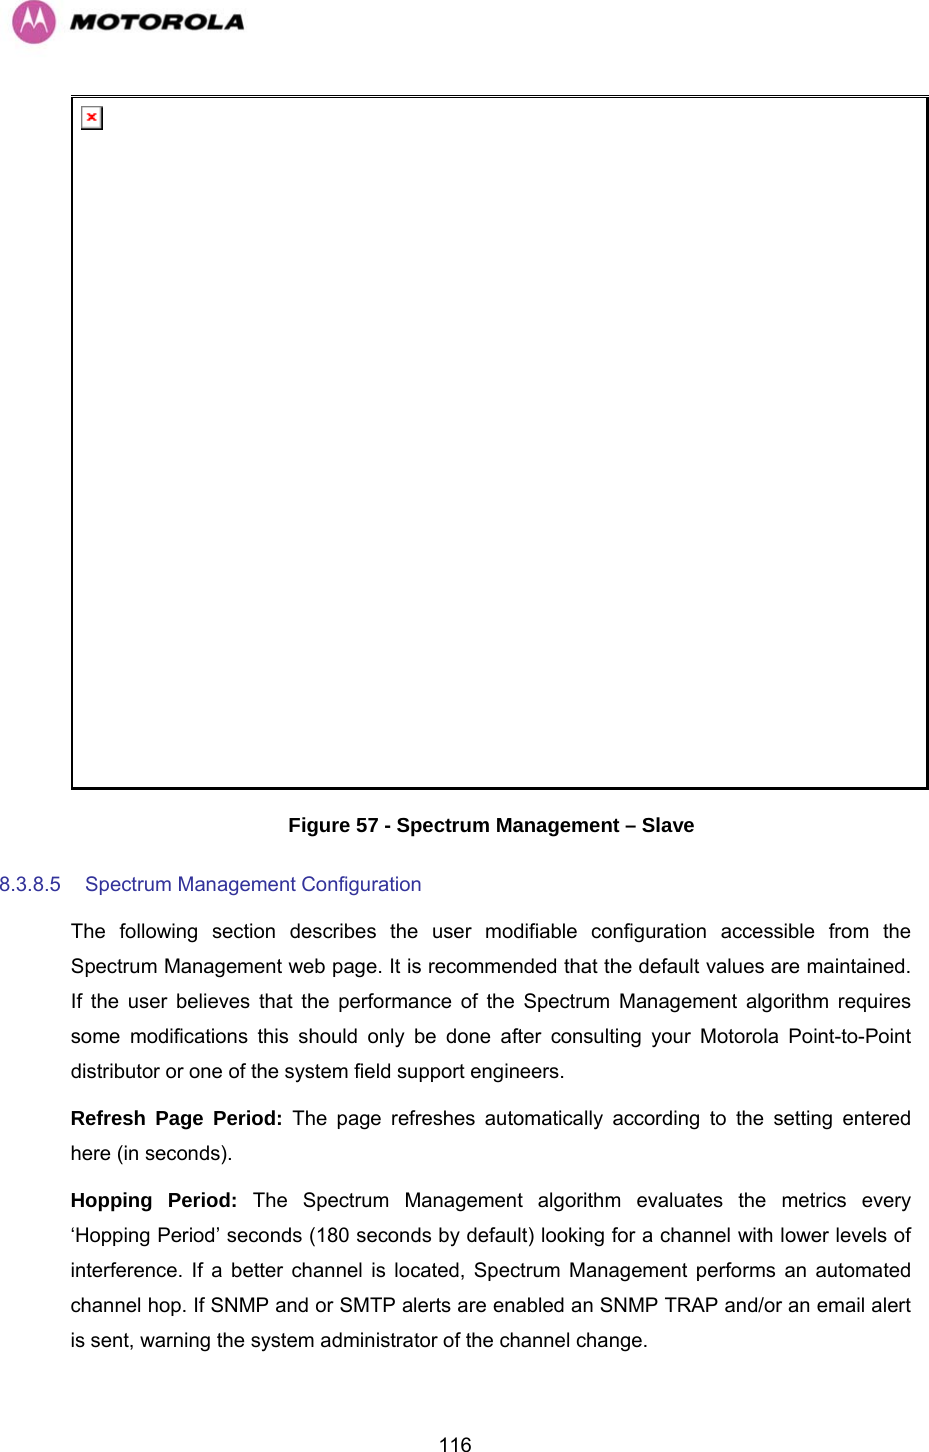   116 Figure 57 - Spectrum Management – Slave 8.3.8.5  Spectrum Management Configuration  The following section describes the user modifiable configuration accessible from the Spectrum Management web page. It is recommended that the default values are maintained. If the user believes that the performance of the Spectrum Management algorithm requires some modifications this should only be done after consulting your Motorola Point-to-Point distributor or one of the system field support engineers. Refresh Page Period: The page refreshes automatically according to the setting entered here (in seconds).  Hopping Period: The Spectrum Management algorithm evaluates the metrics every ‘Hopping Period’ seconds (180 seconds by default) looking for a channel with lower levels of interference. If a better channel is located, Spectrum Management performs an automated channel hop. If SNMP and or SMTP alerts are enabled an SNMP TRAP and/or an email alert is sent, warning the system administrator of the channel change. 